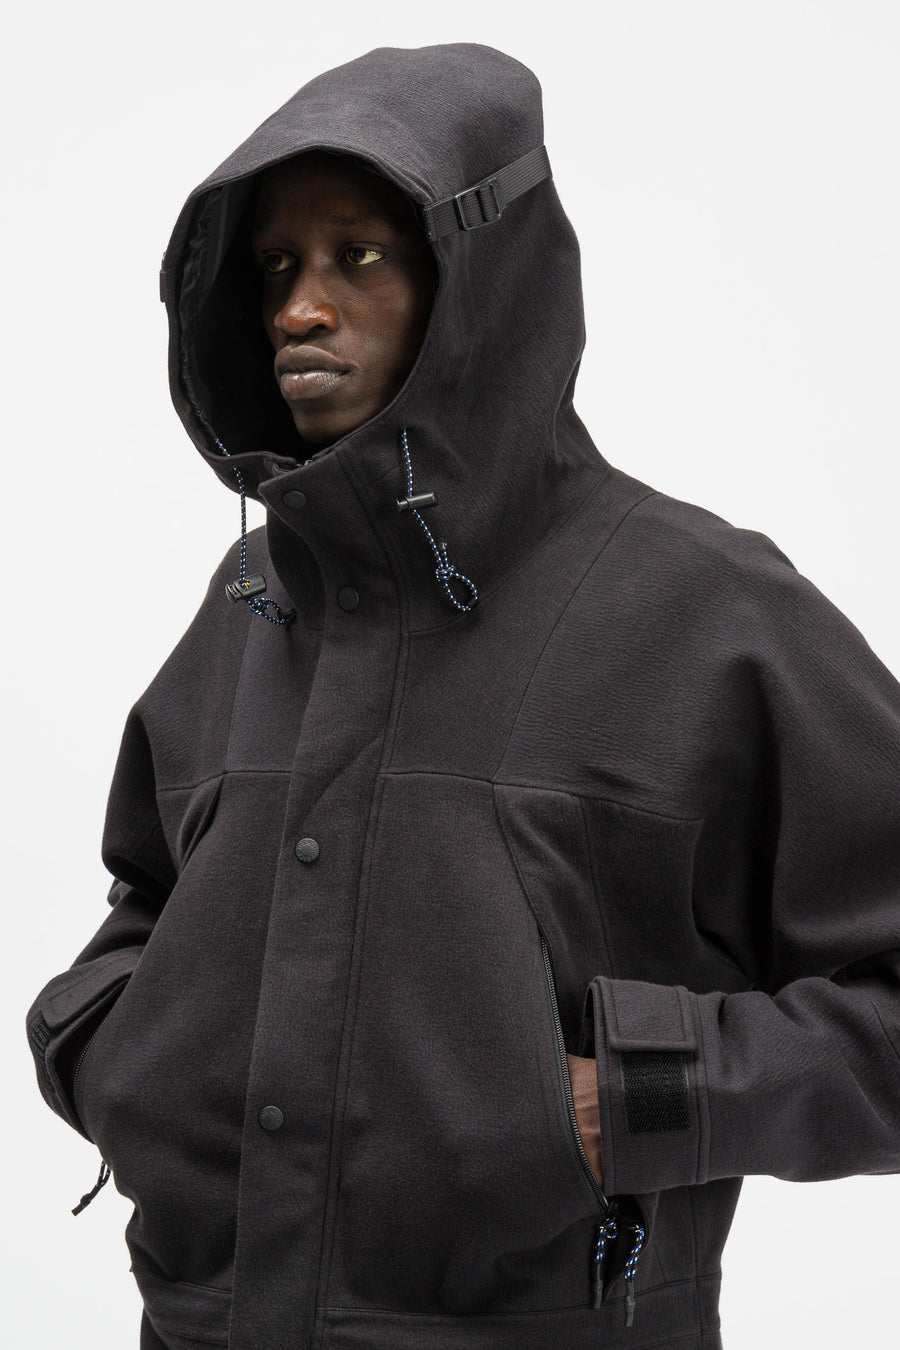 the north face mountain jacket black